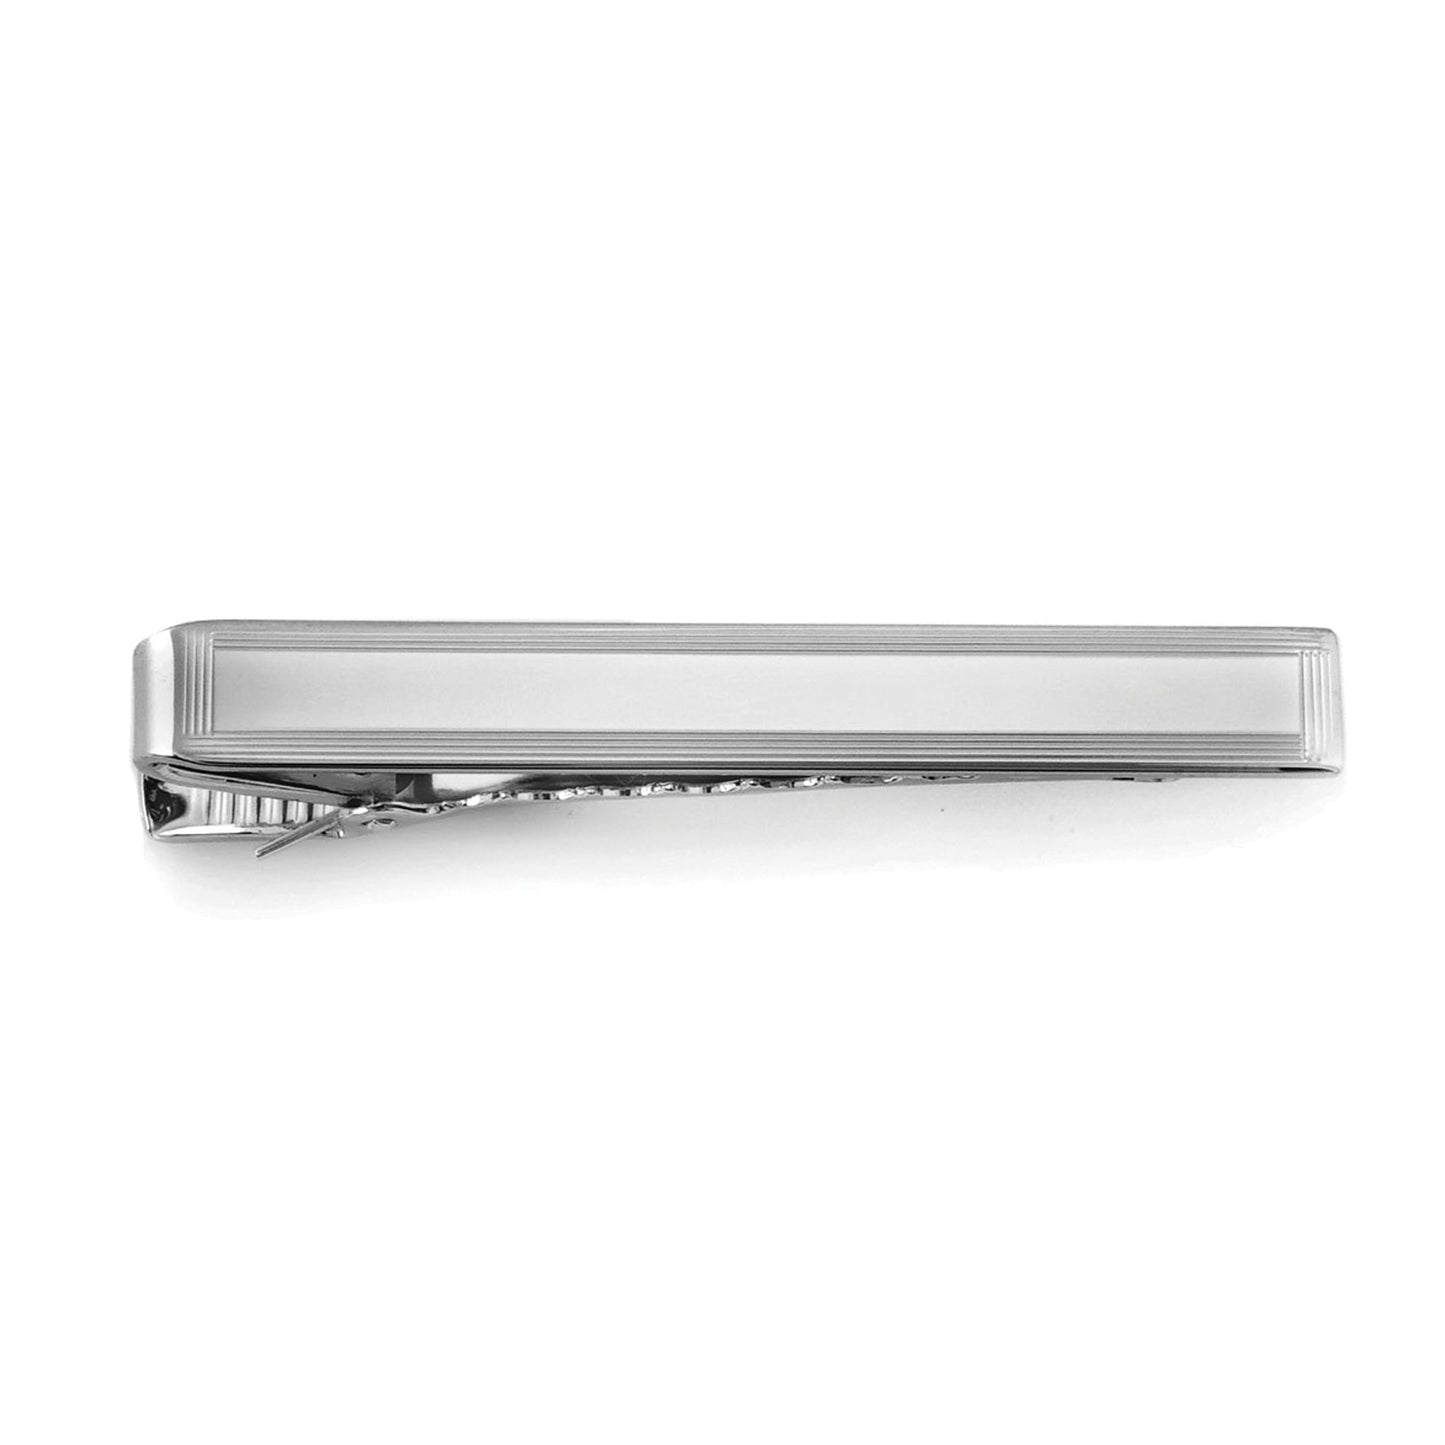 A sterling silver engine-turned tie bar displayed on a neutral white background.